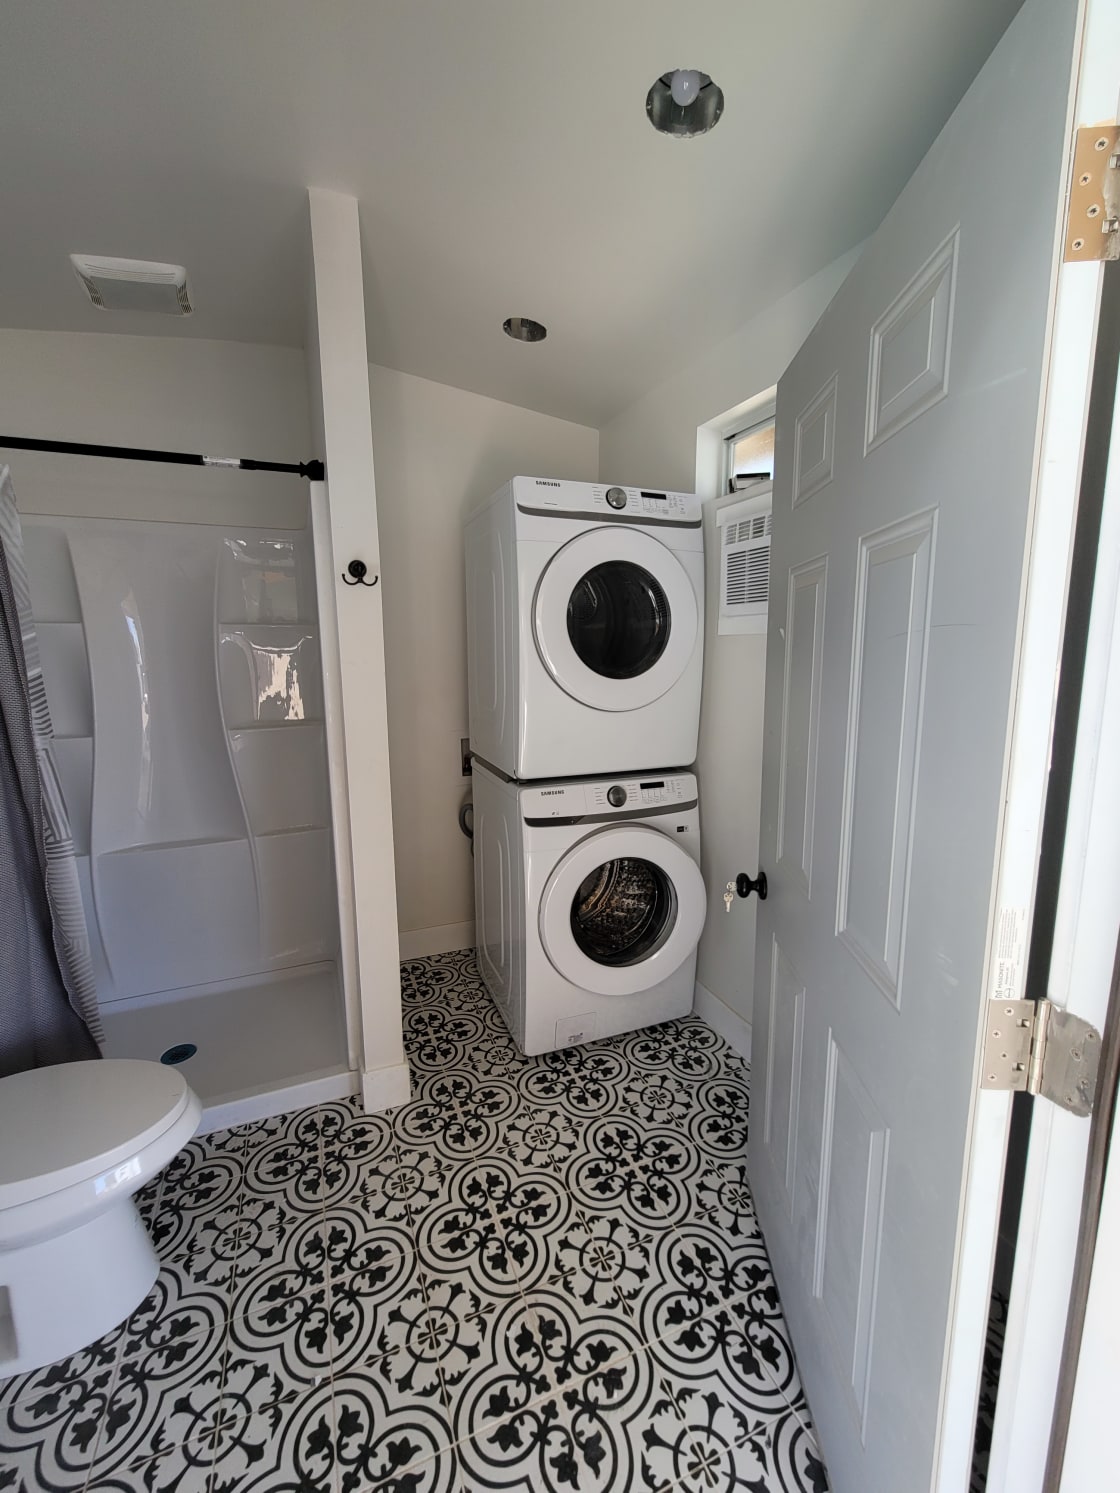 Hip Camp bathroom with FULL SIZE washer and dryer